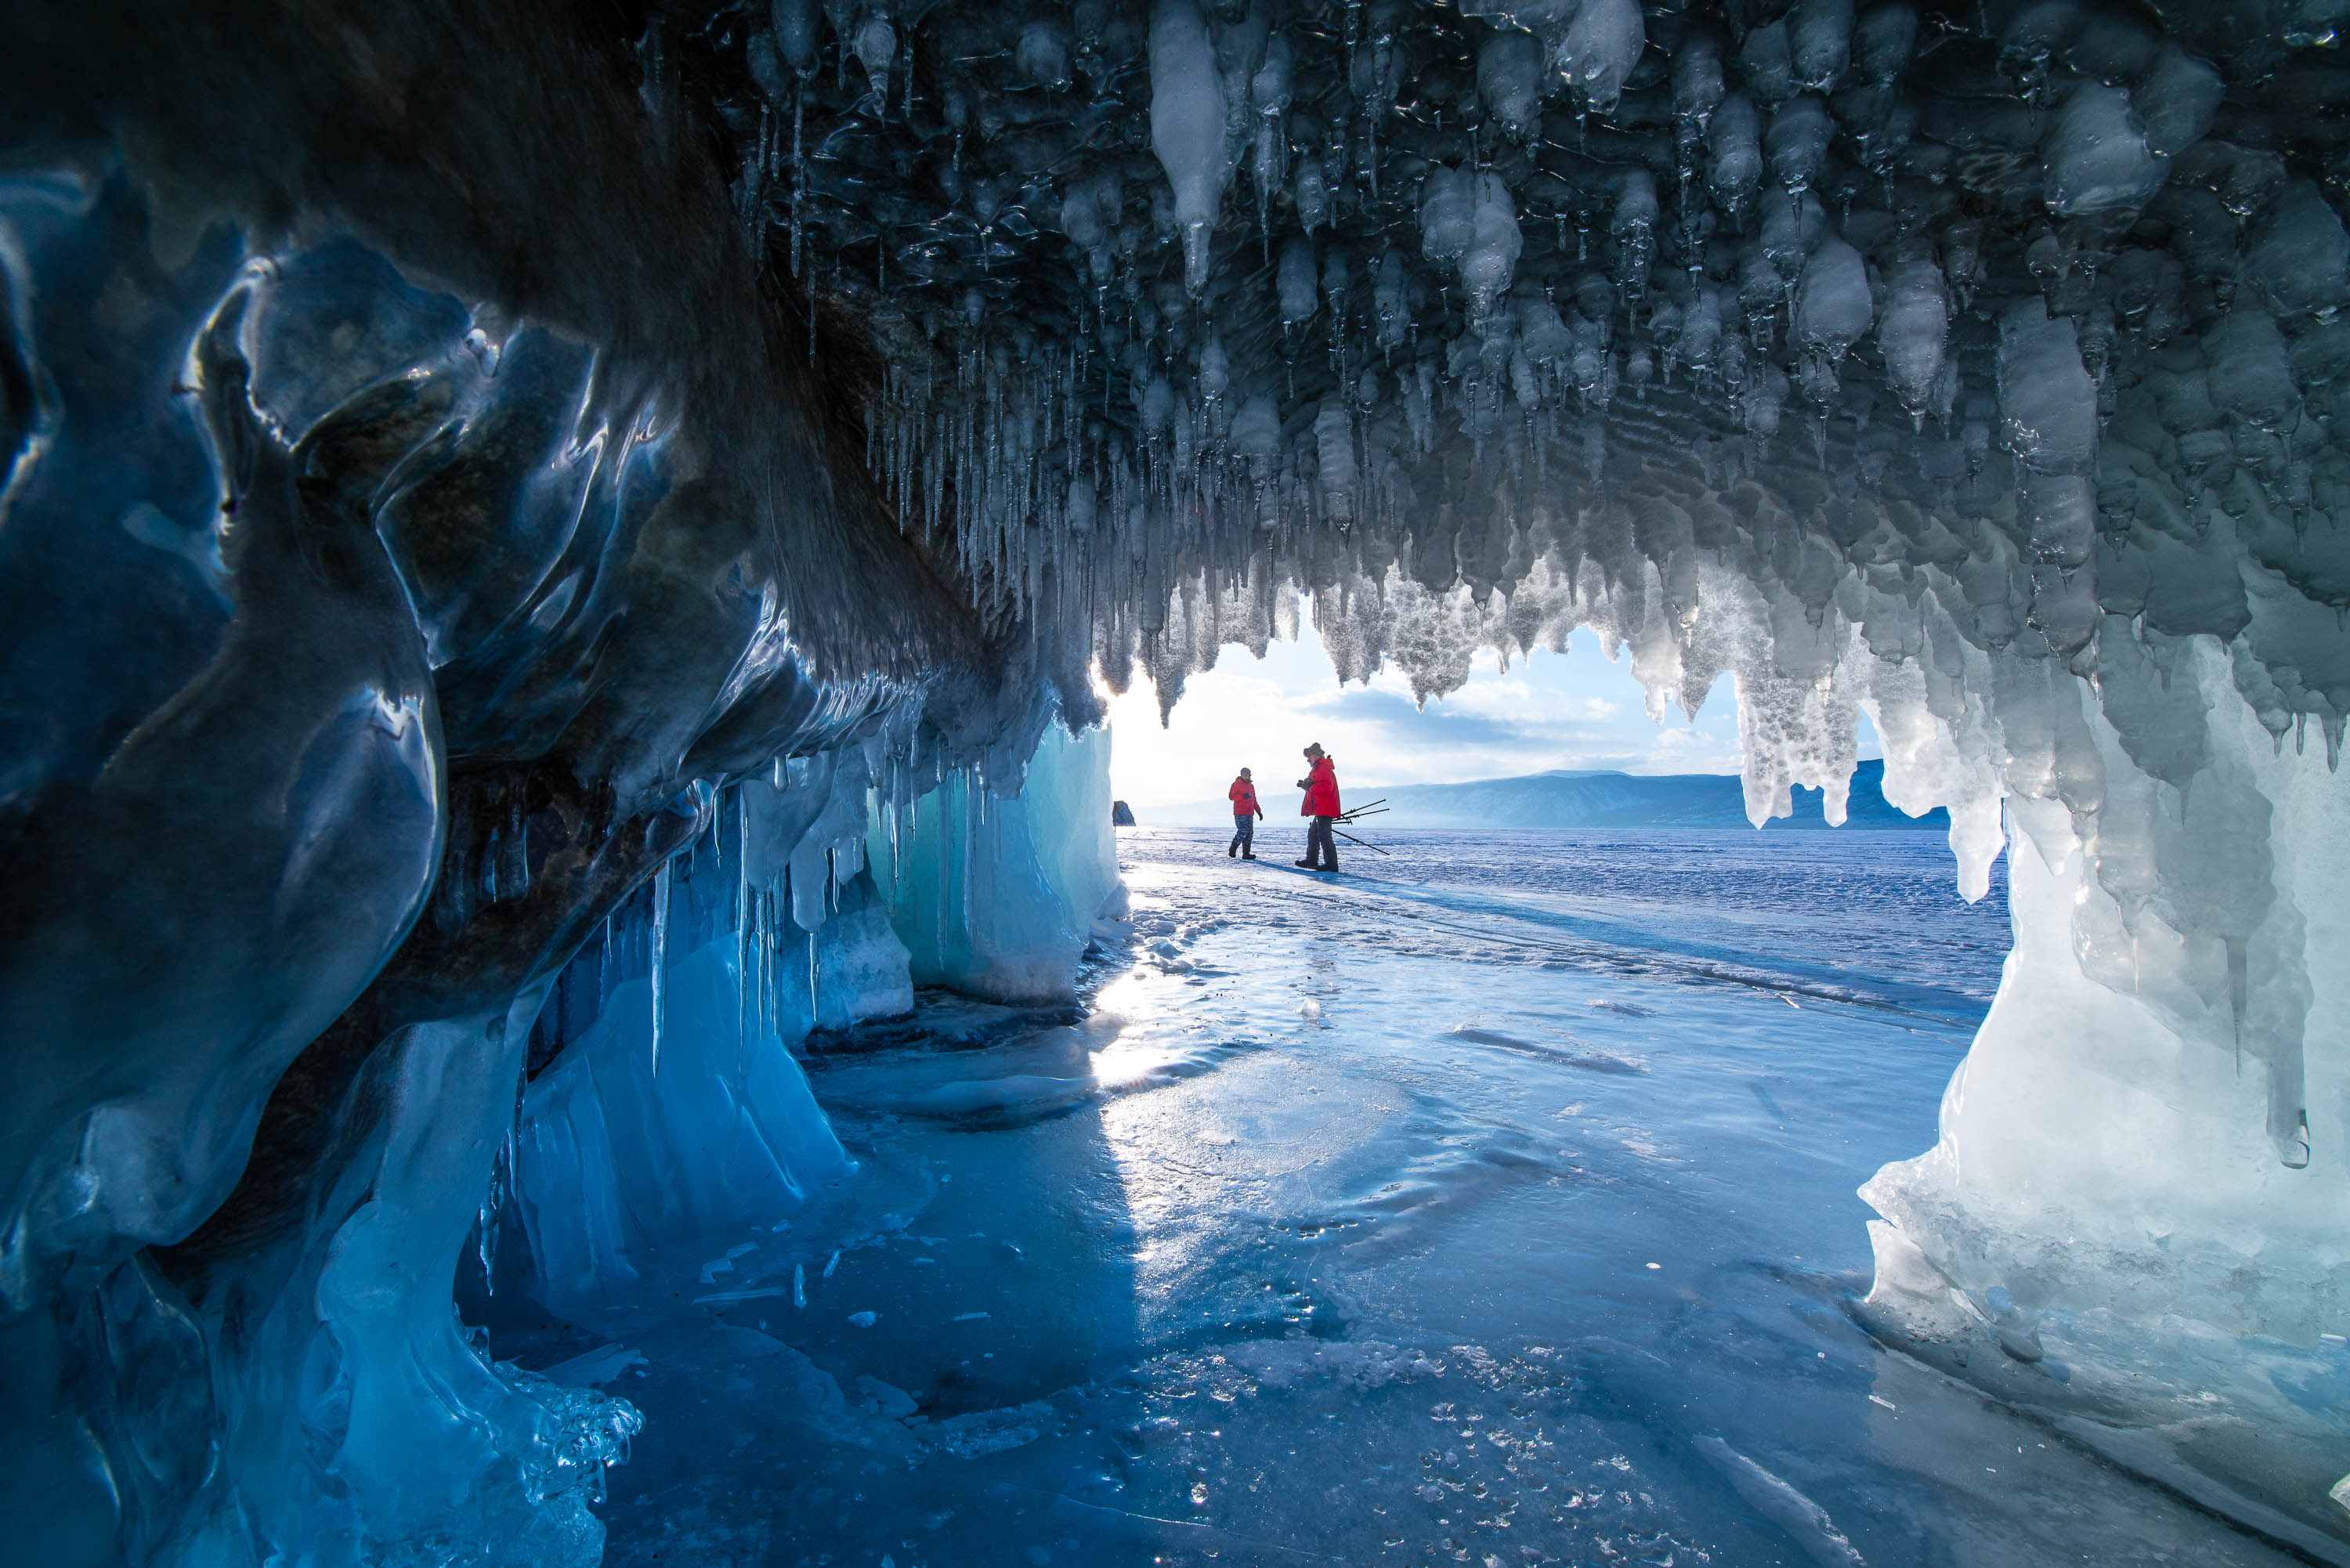 A tunnel formed by the crystalline ice on a frozen surface, Lake Baikal #44, Siberia, Russia